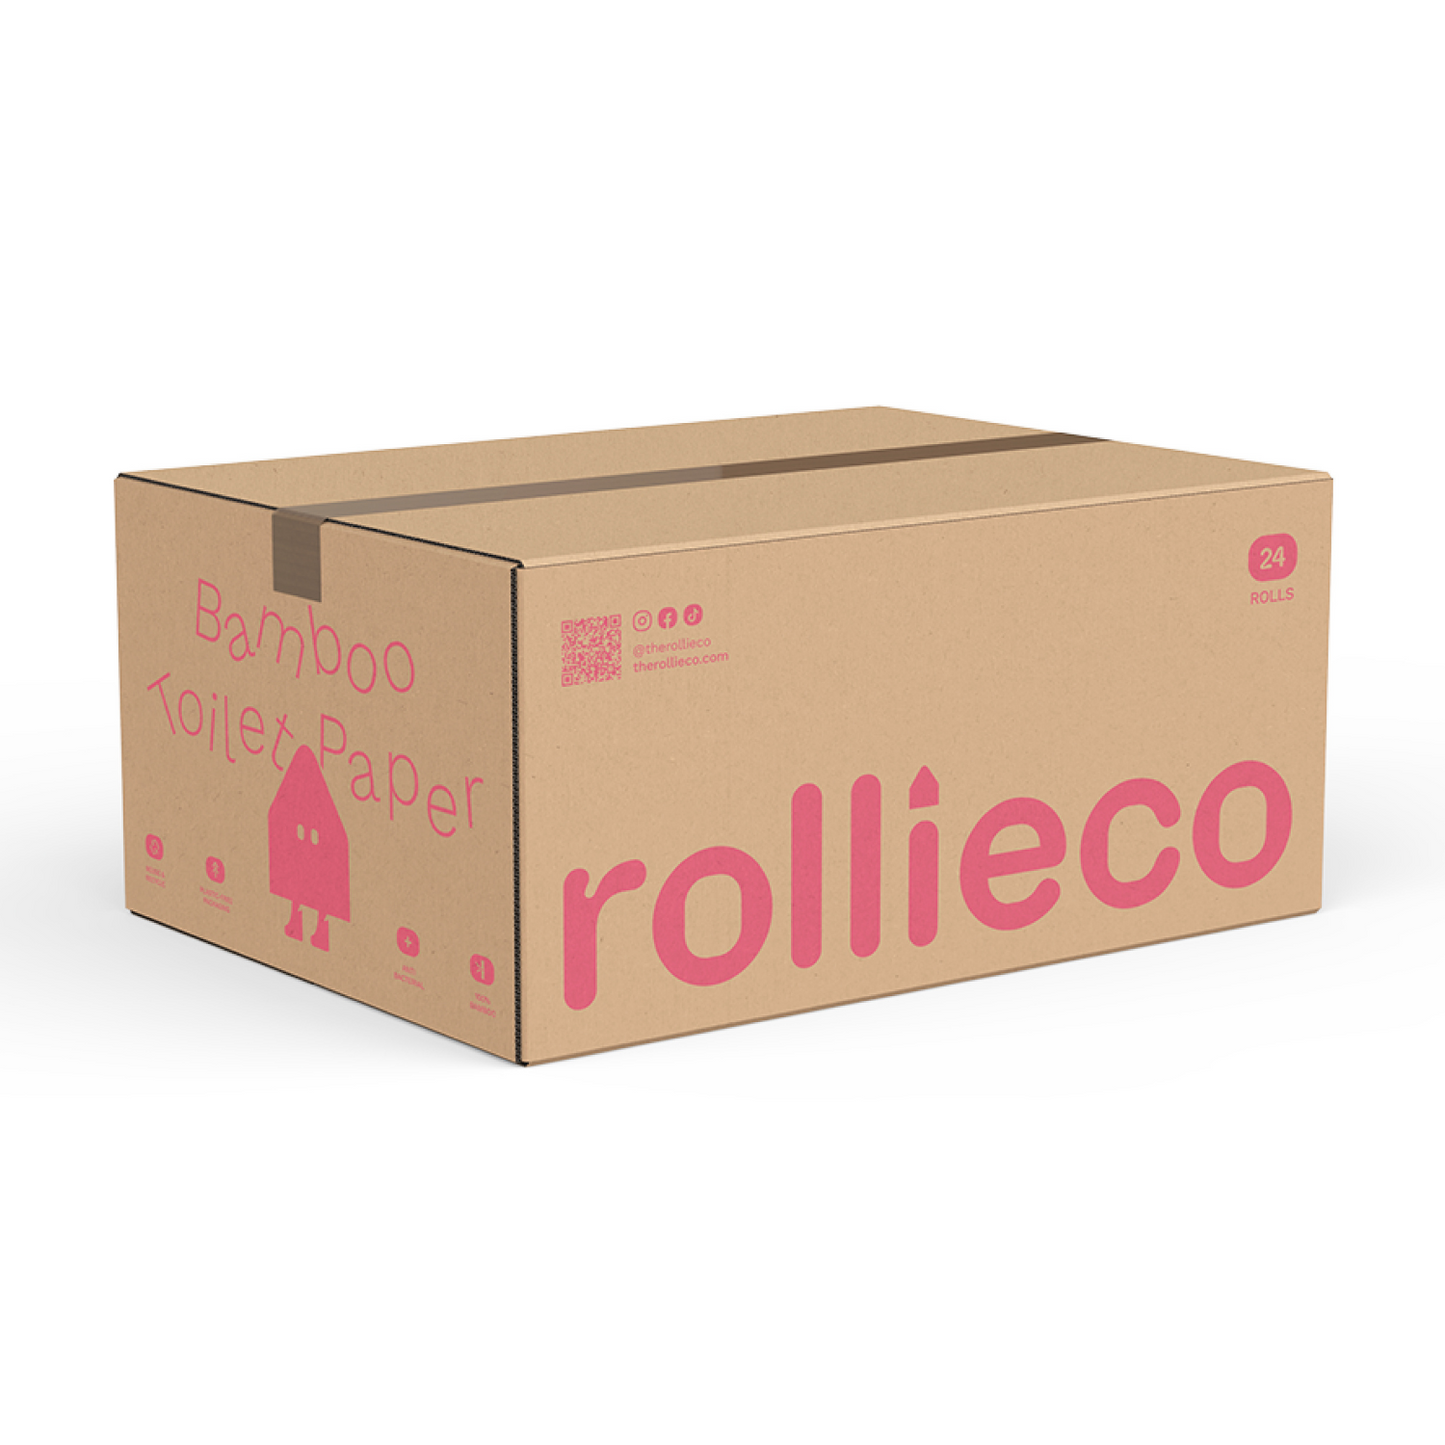 24 rolls (250 sheets per roll) 3-ply 100% Bamboo toilet roll